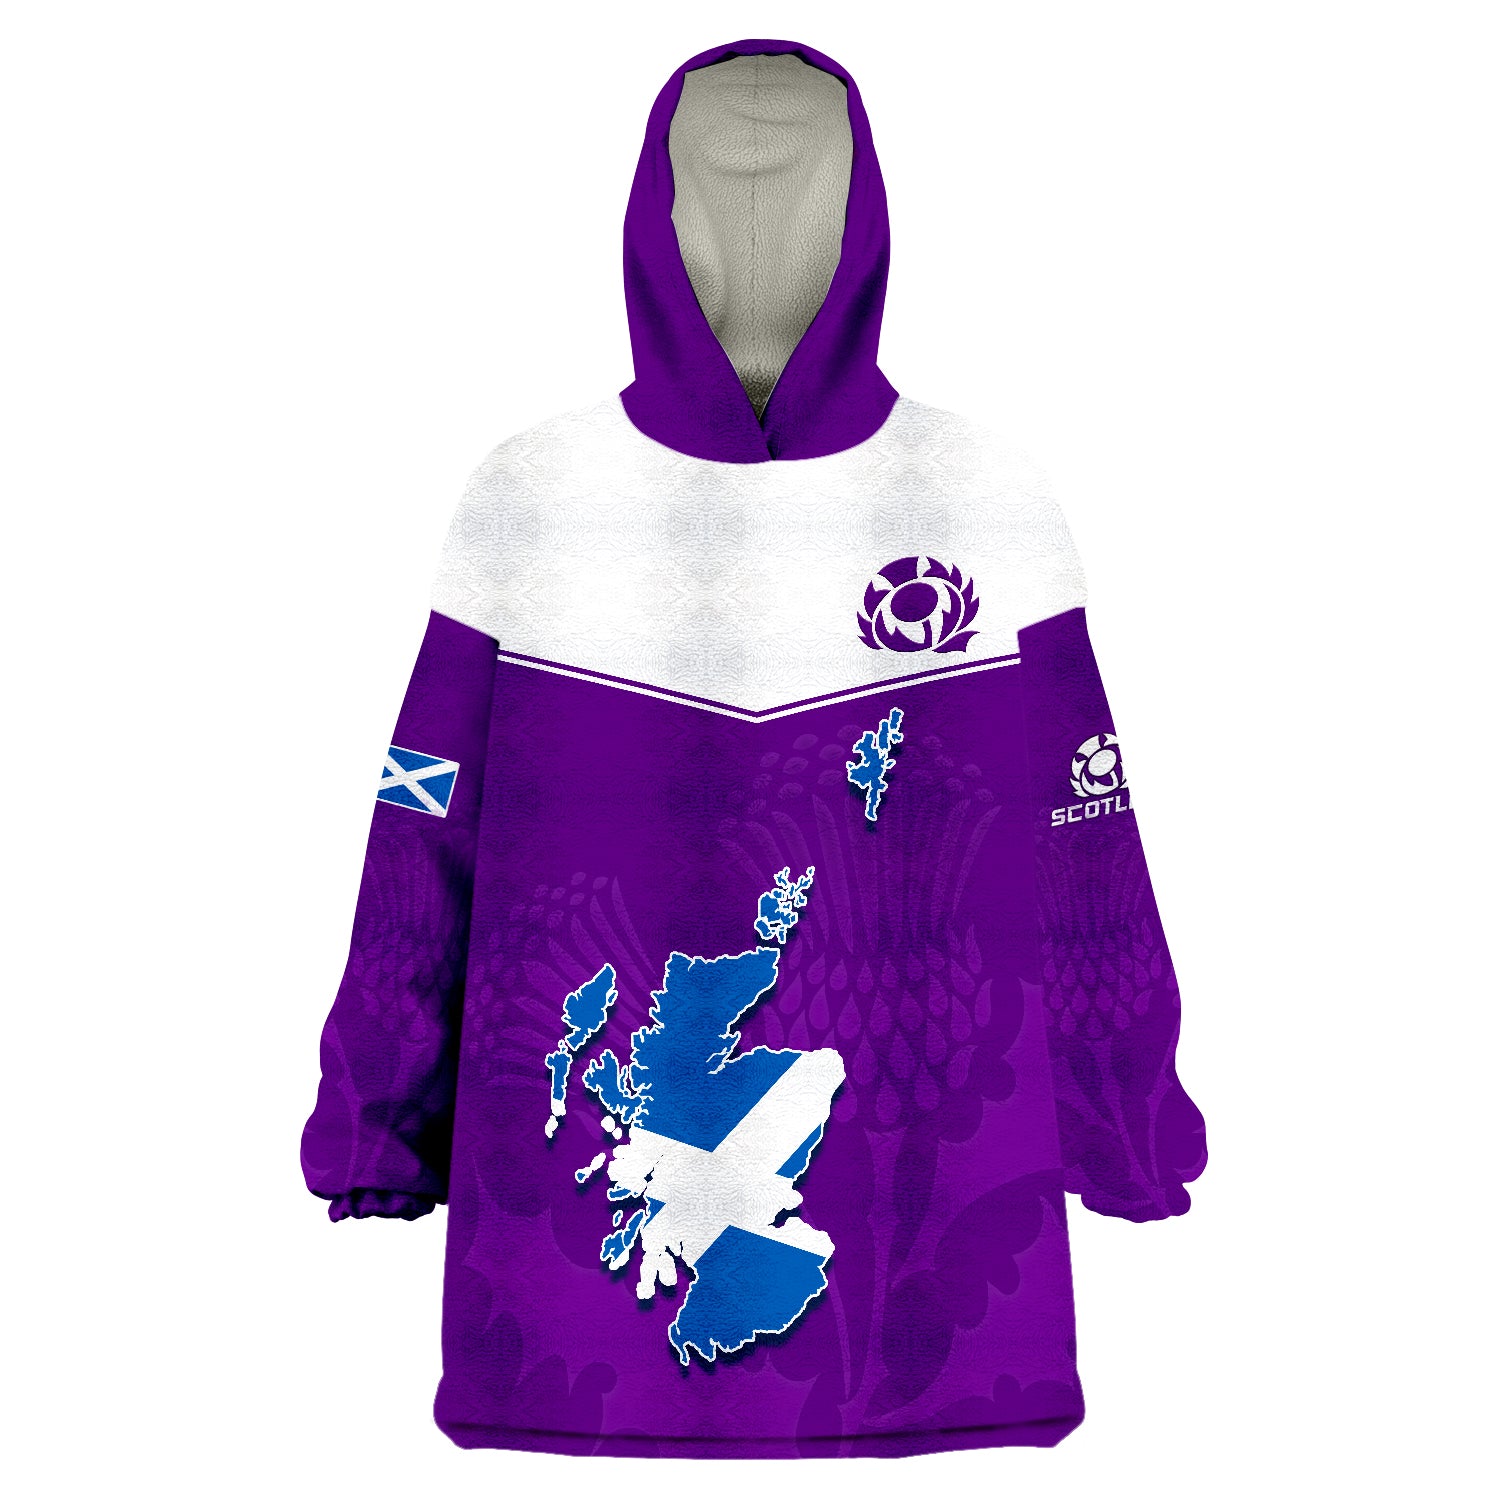 scottish-rugby-map-of-scotland-thistle-purple-version-wearable-blanket-hoodie